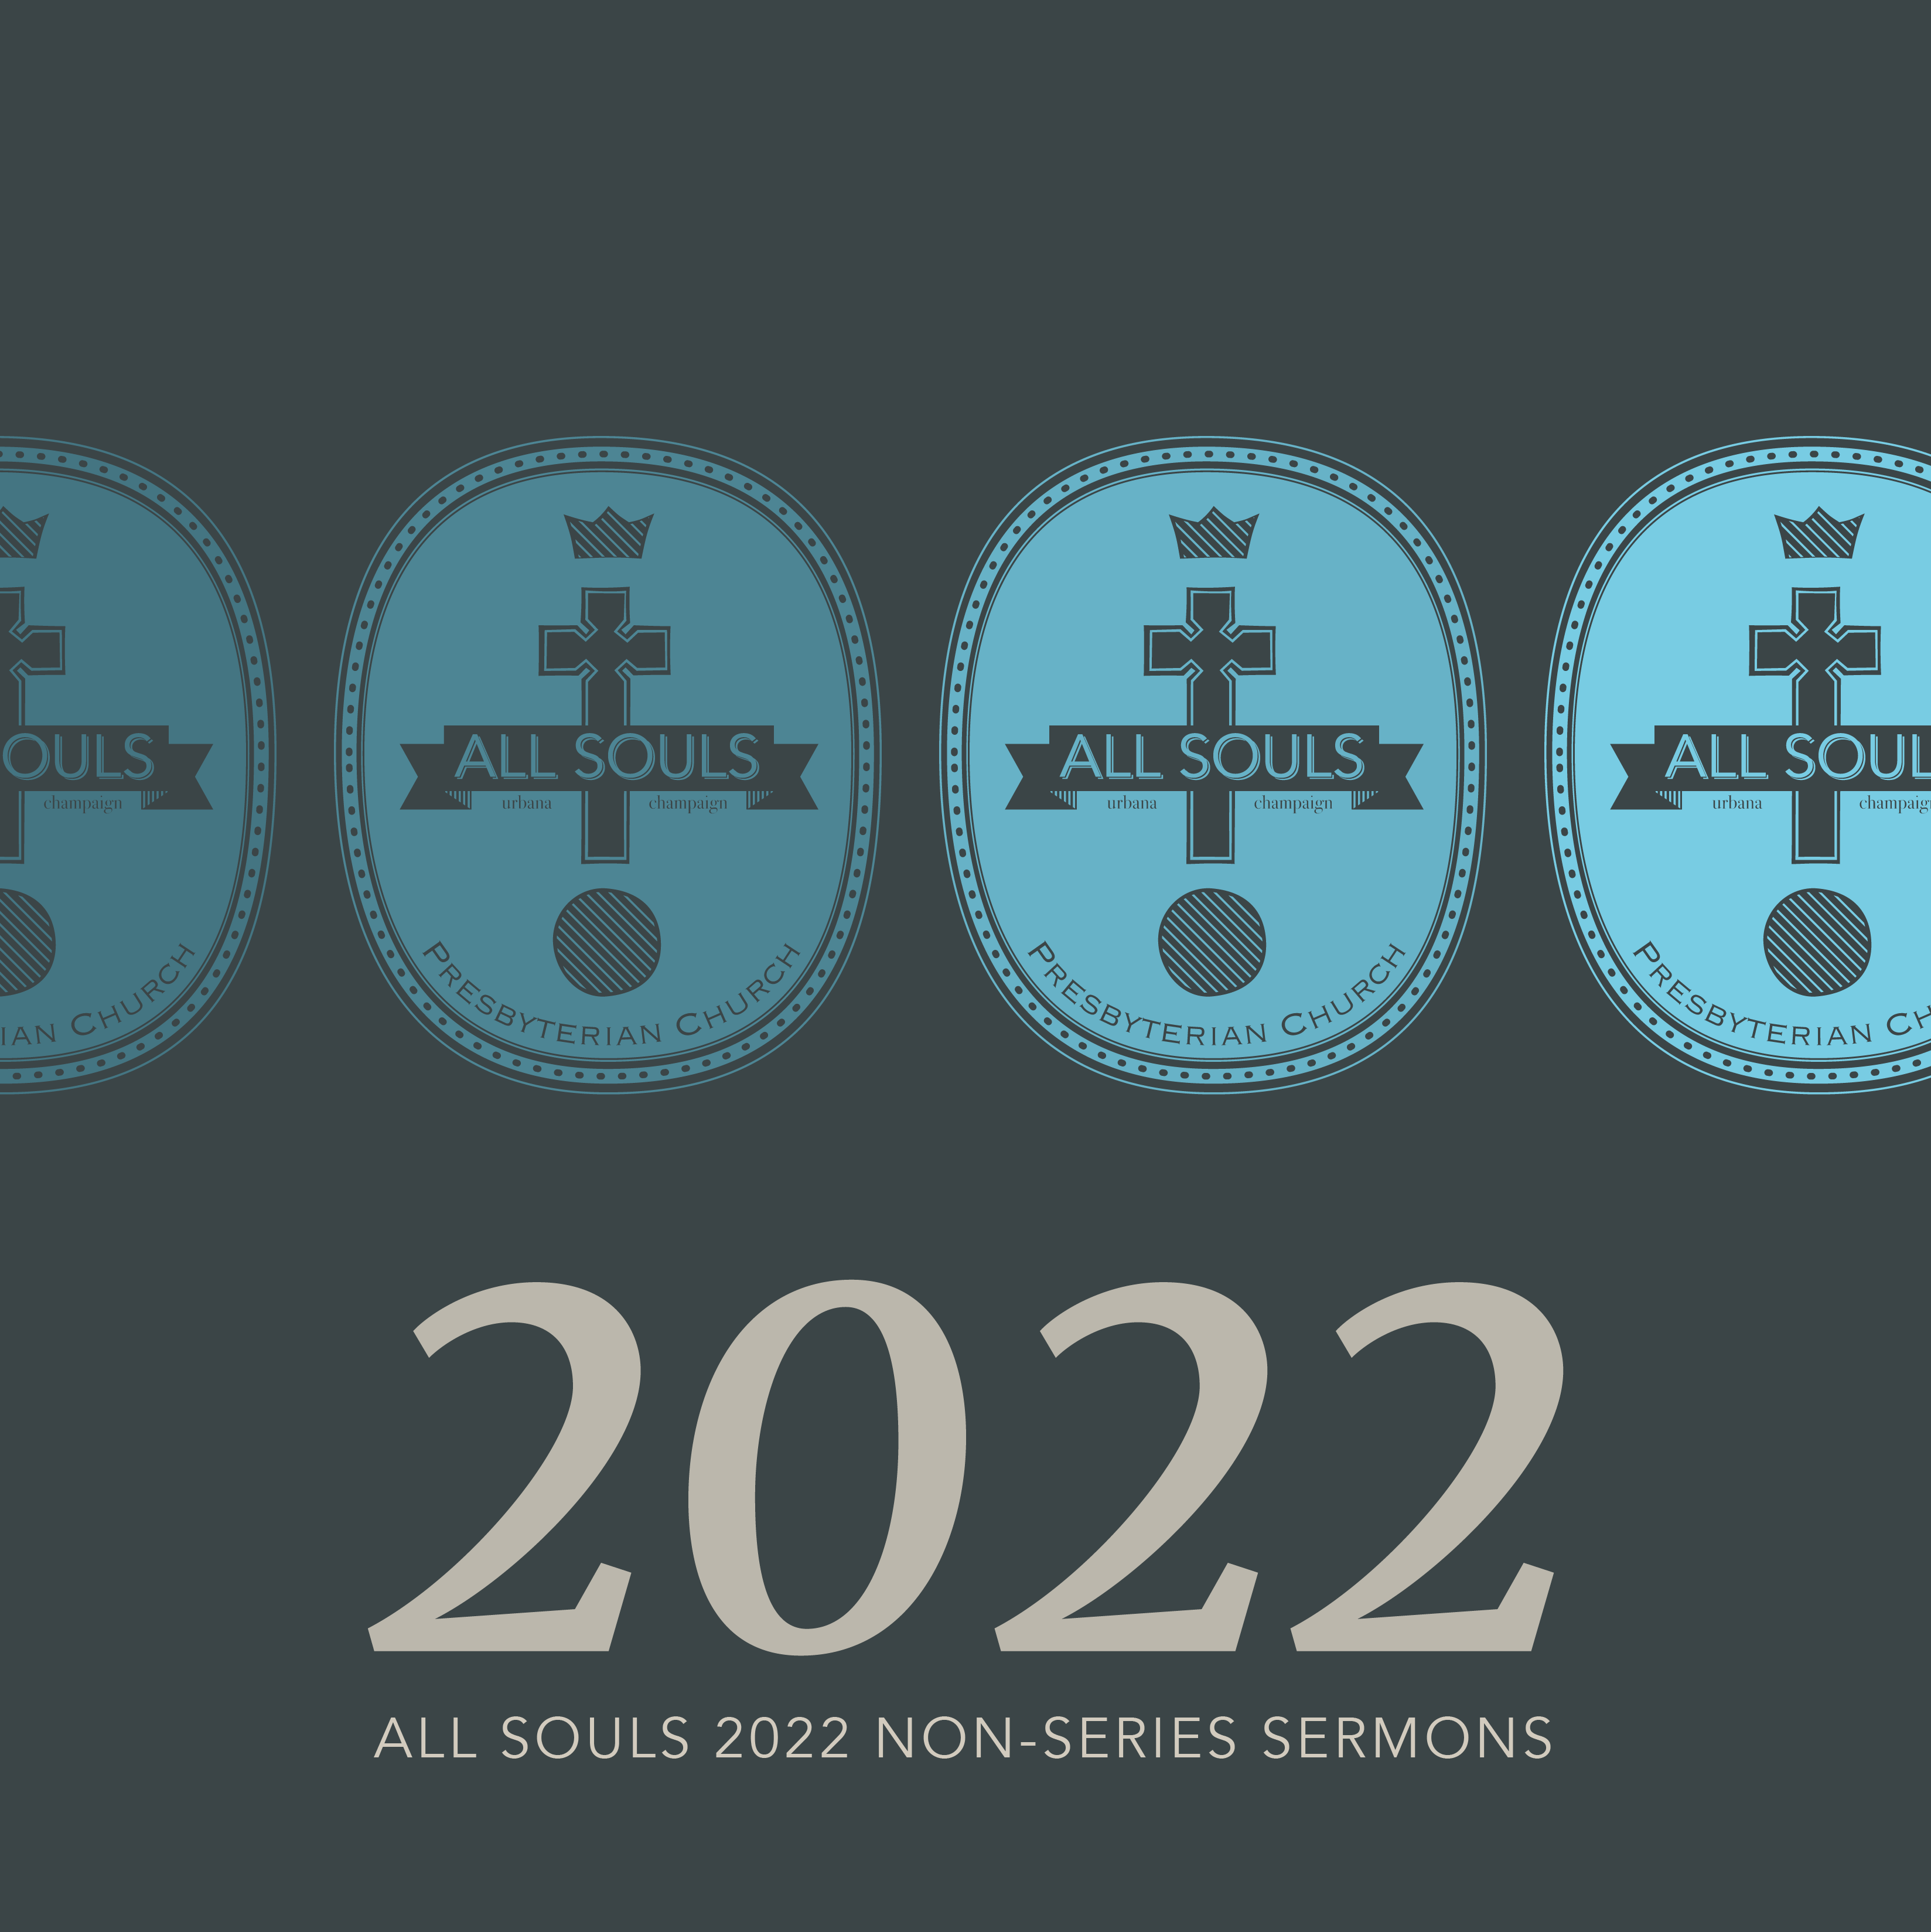 All Souls Logo in four shades of blue on a dark background